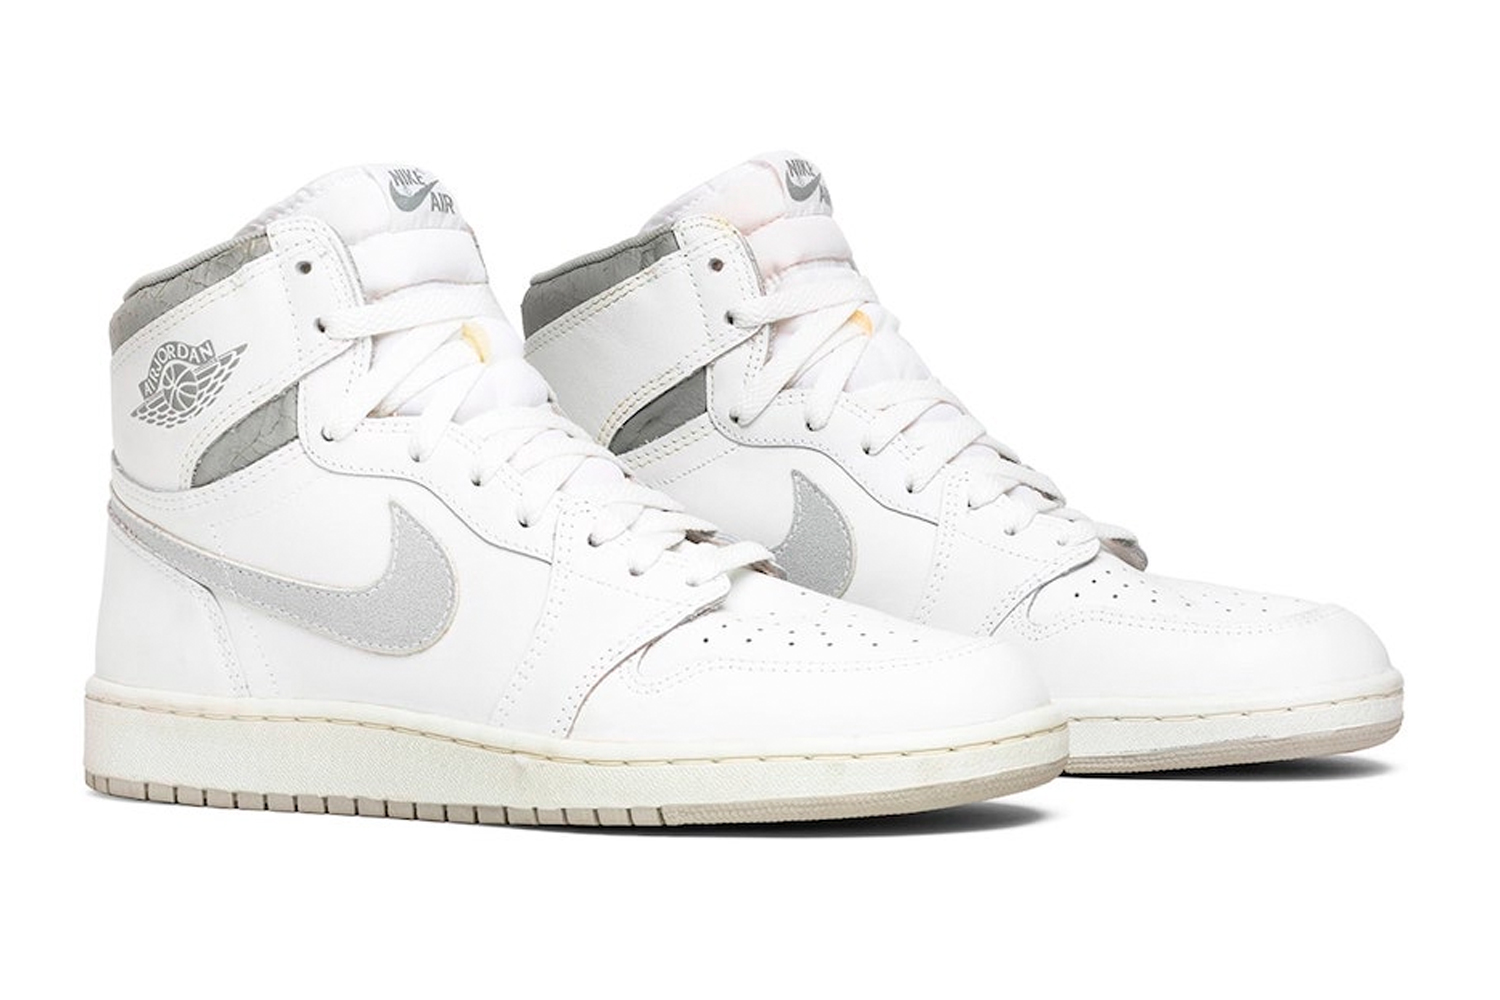 Jordan 1 “Neutral Grey” may be back after 35 Years